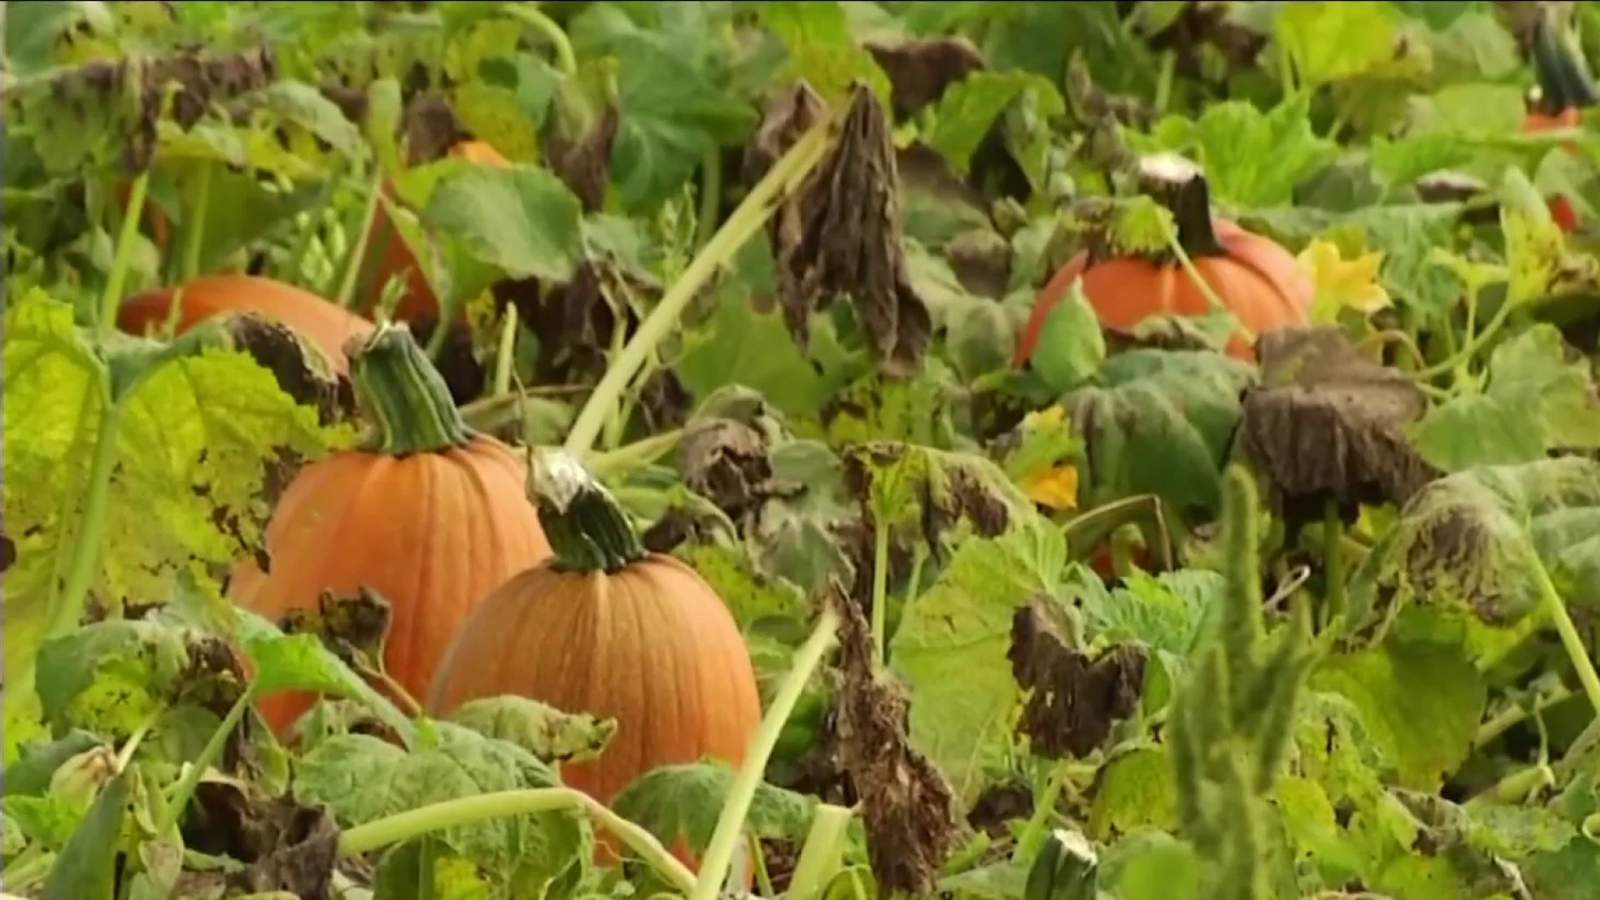 Pumpkin dishes, drinks and activities at Sinkland Farms